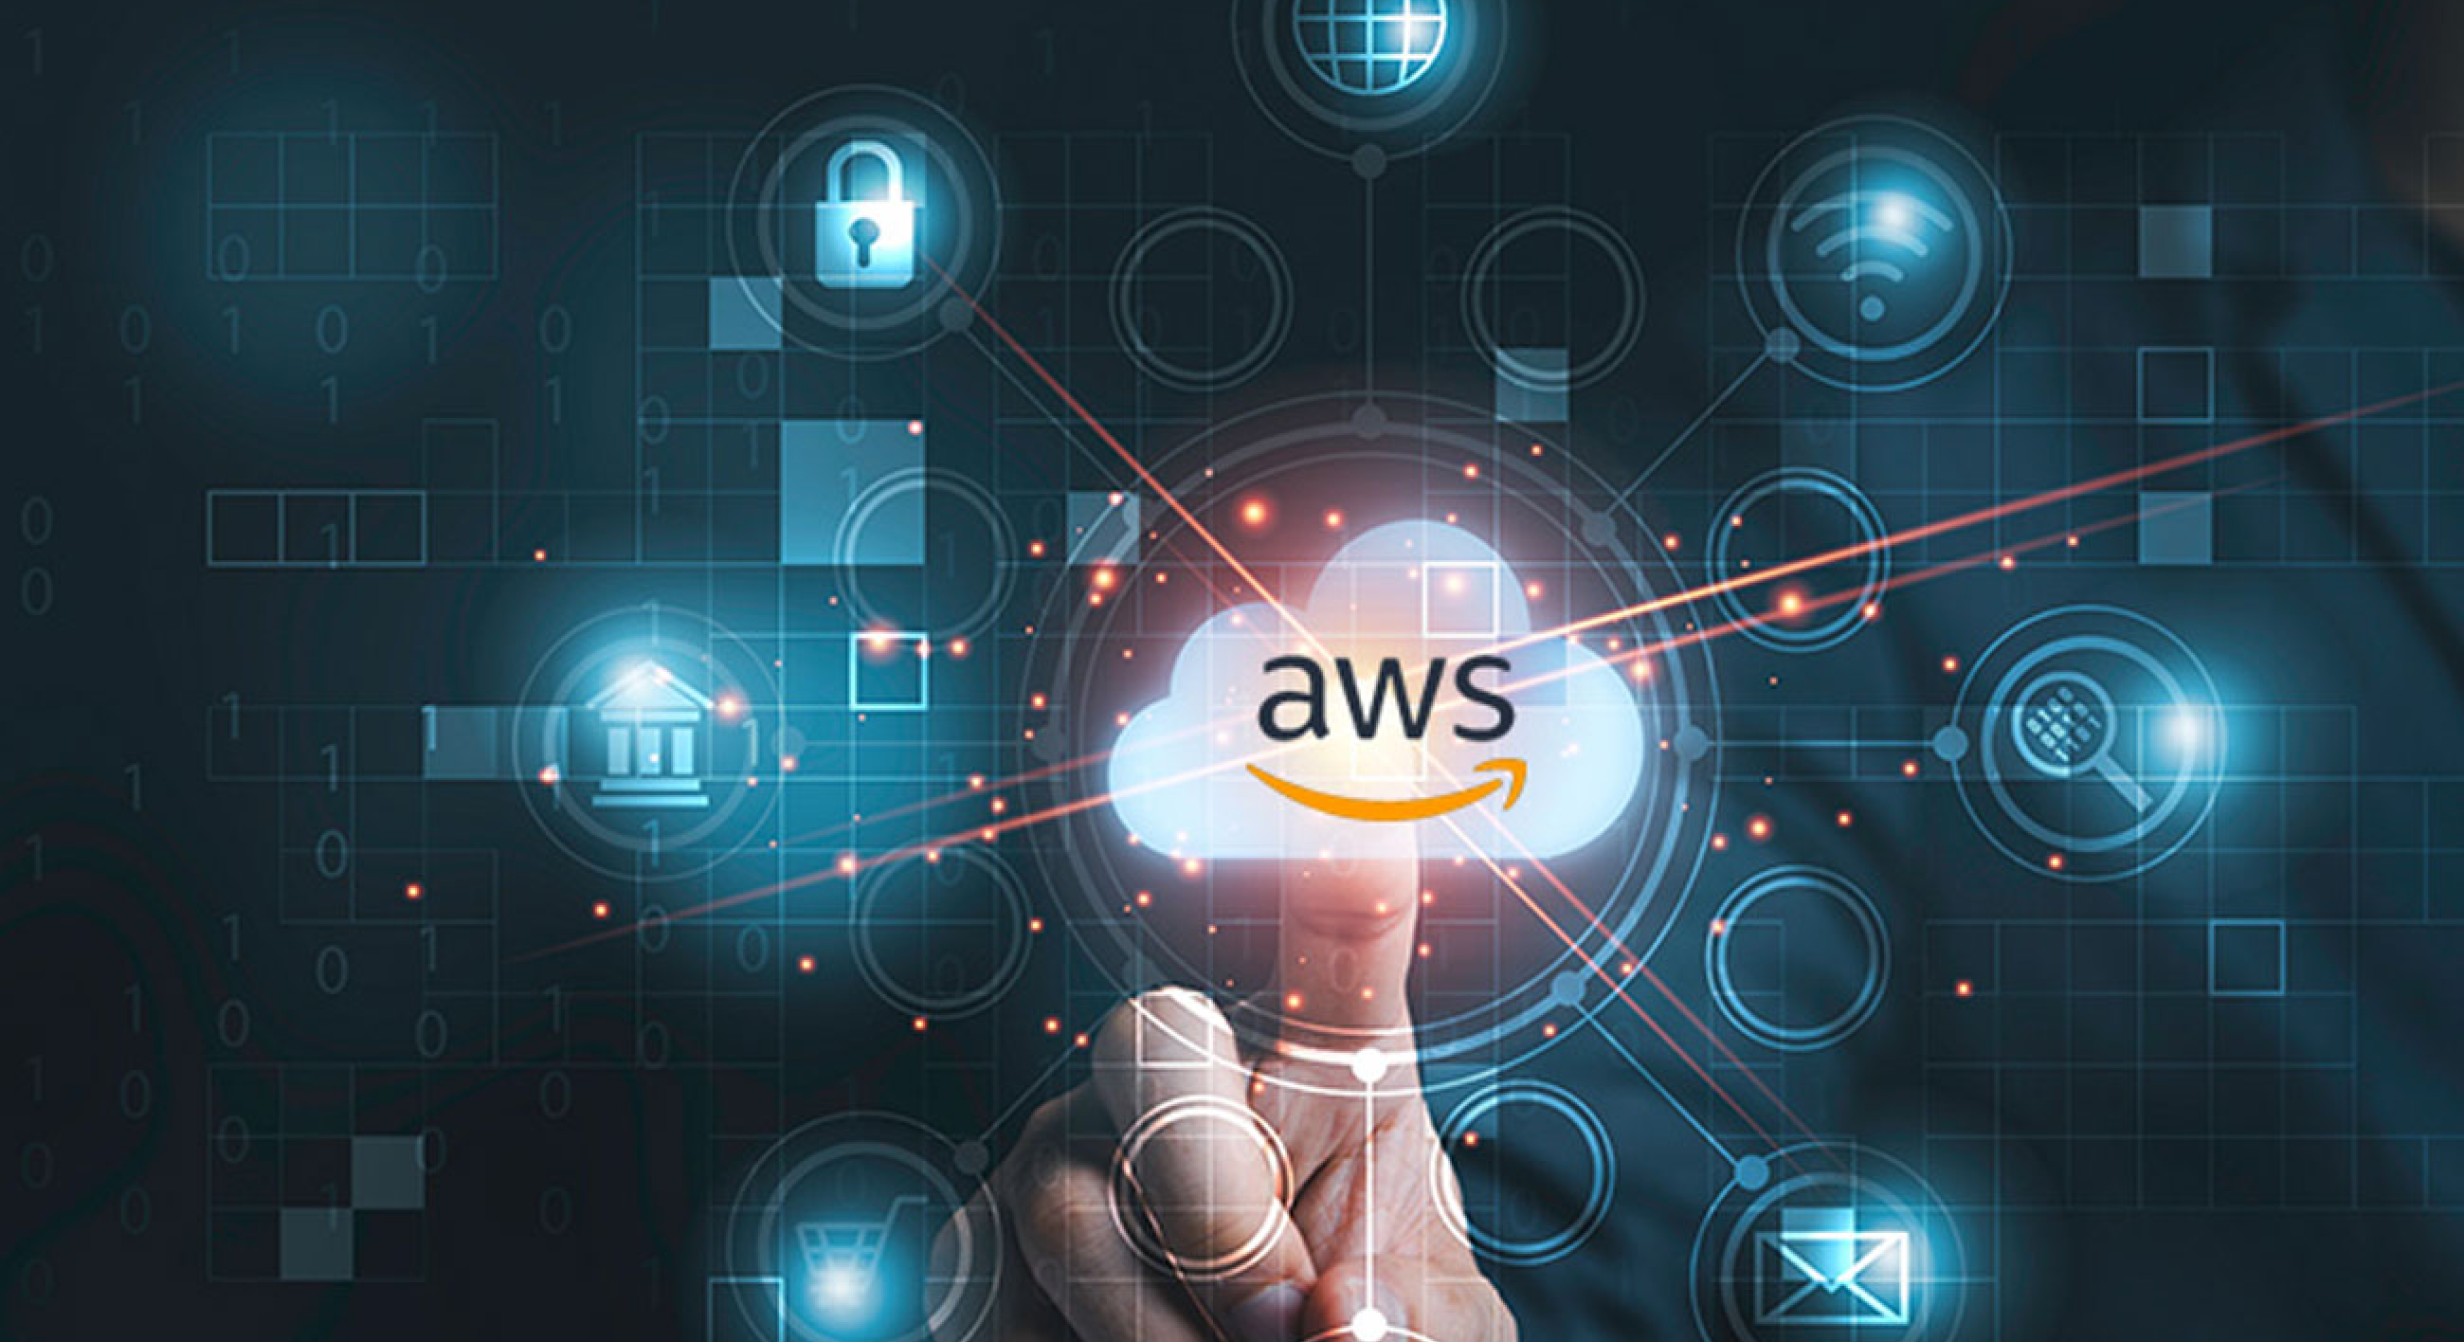 Graphic image of AWS.